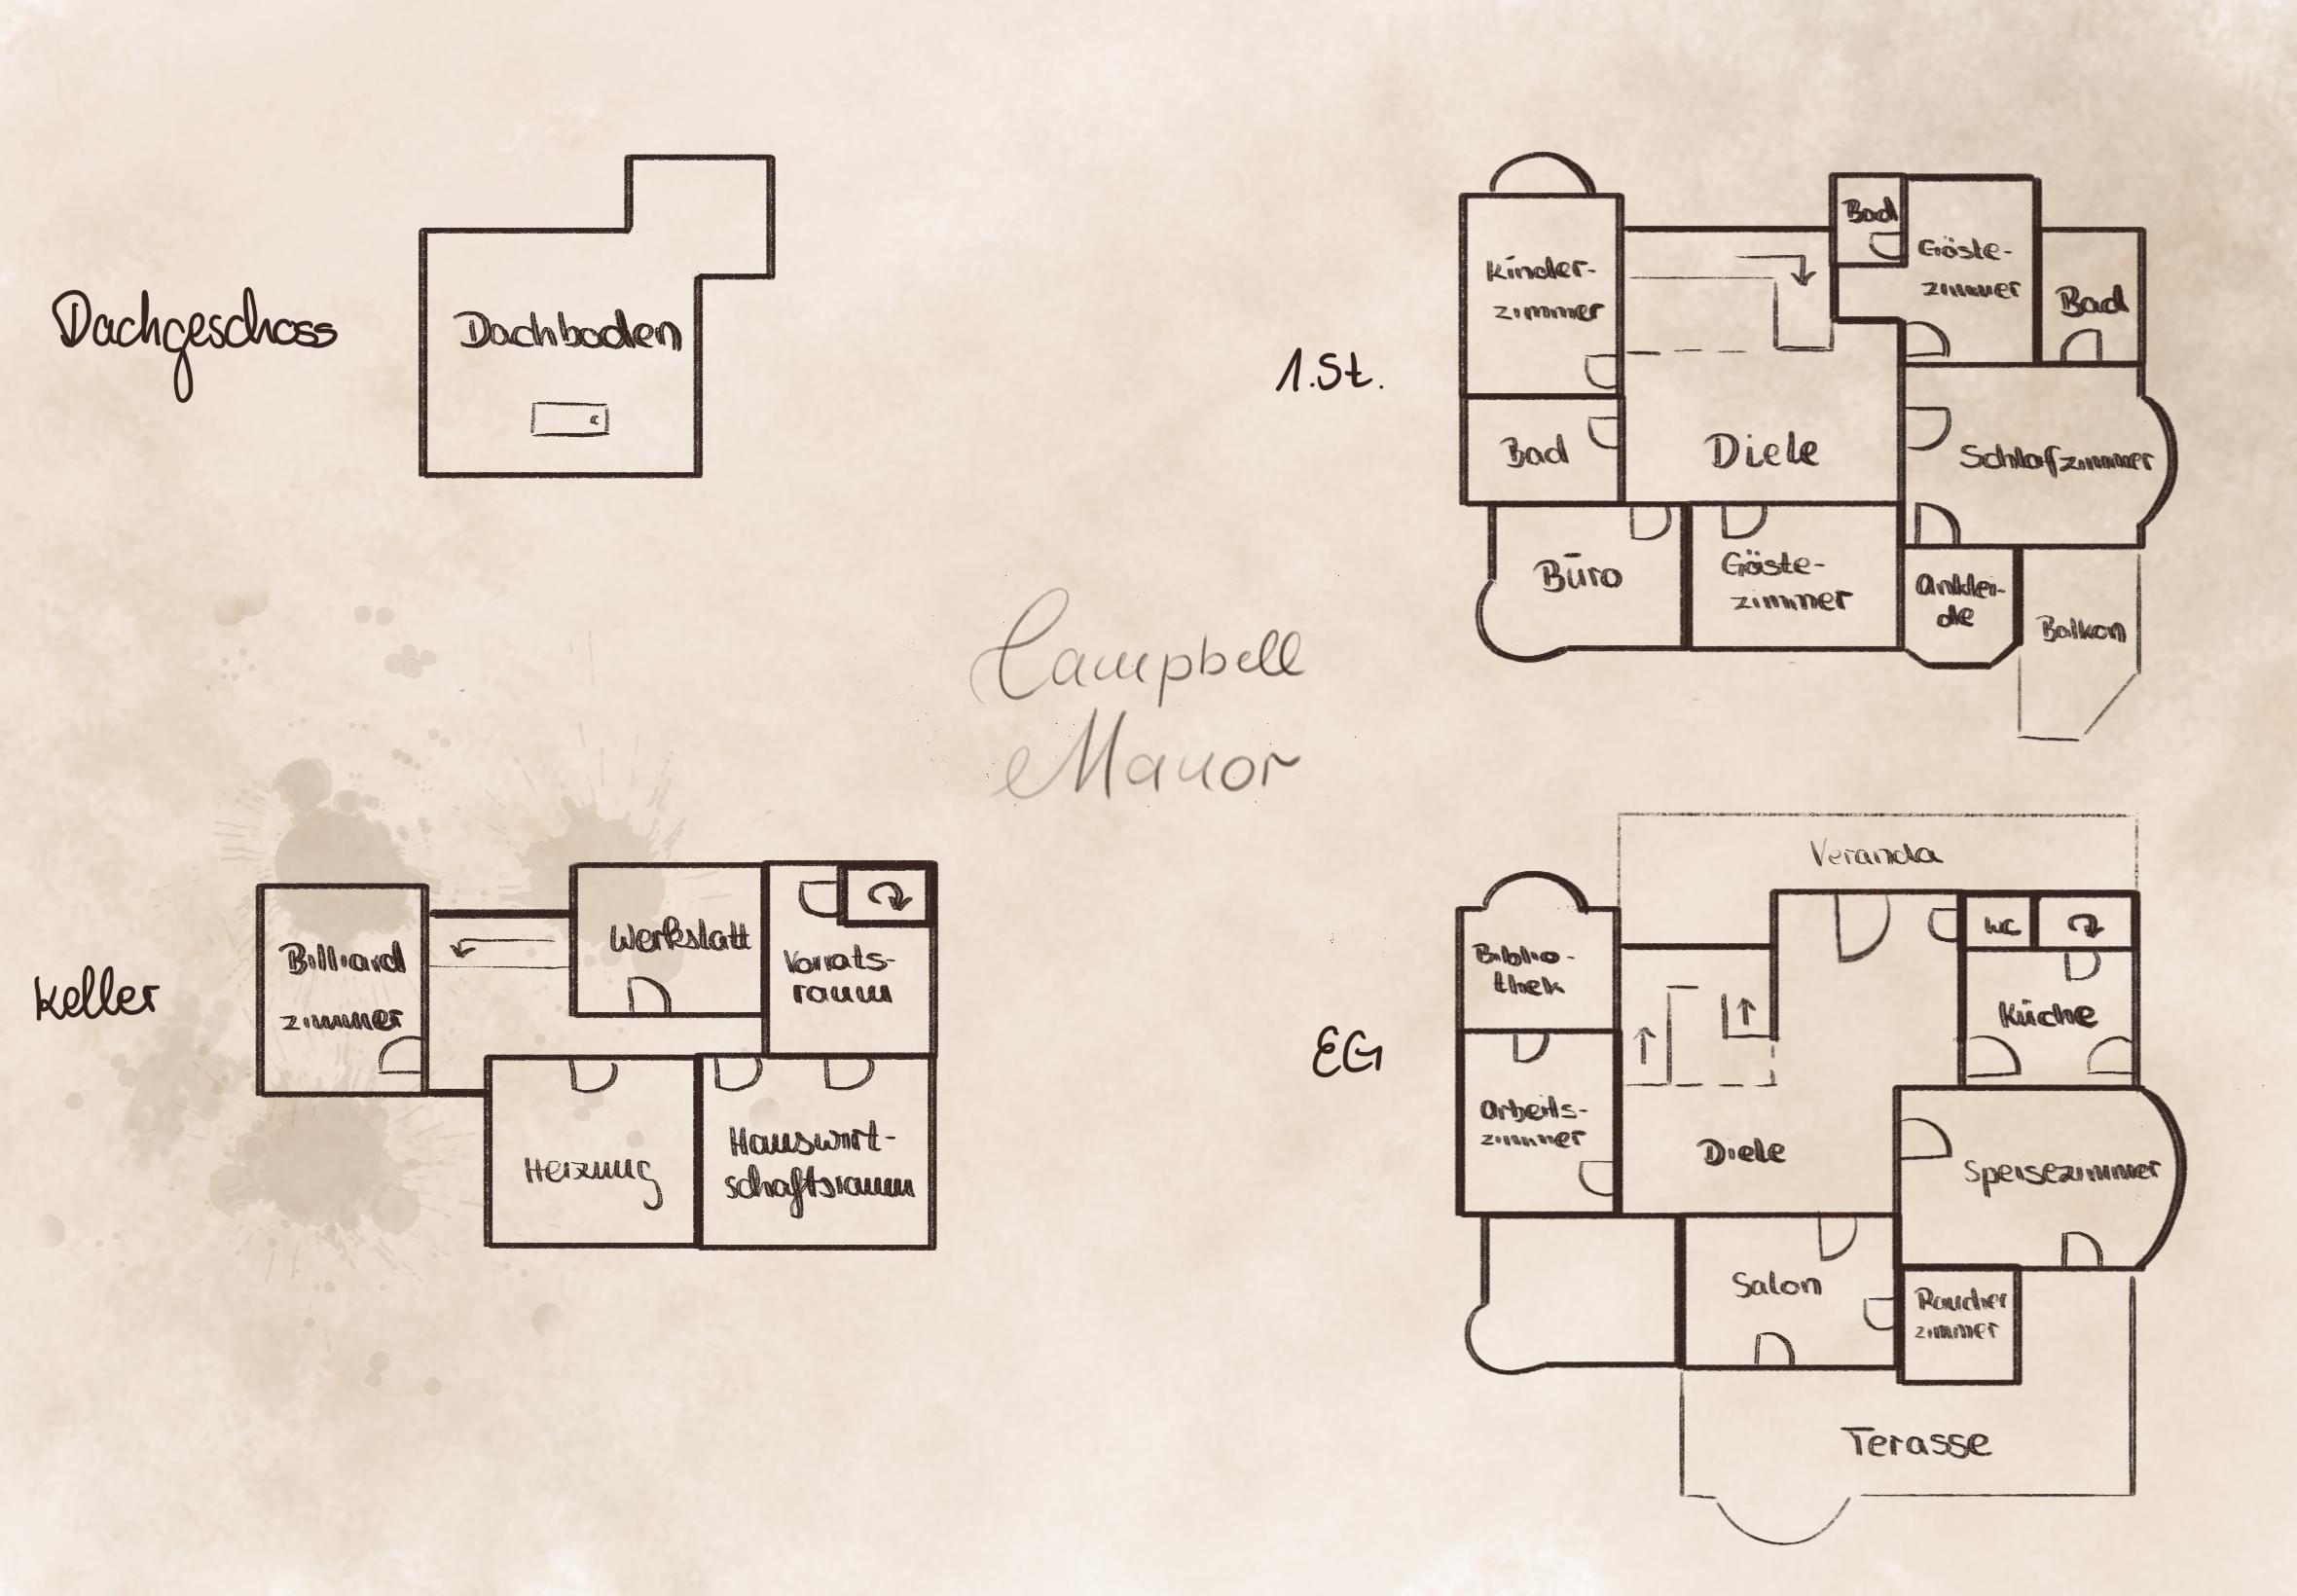 Datei:Grundriss Campbell Manor.png